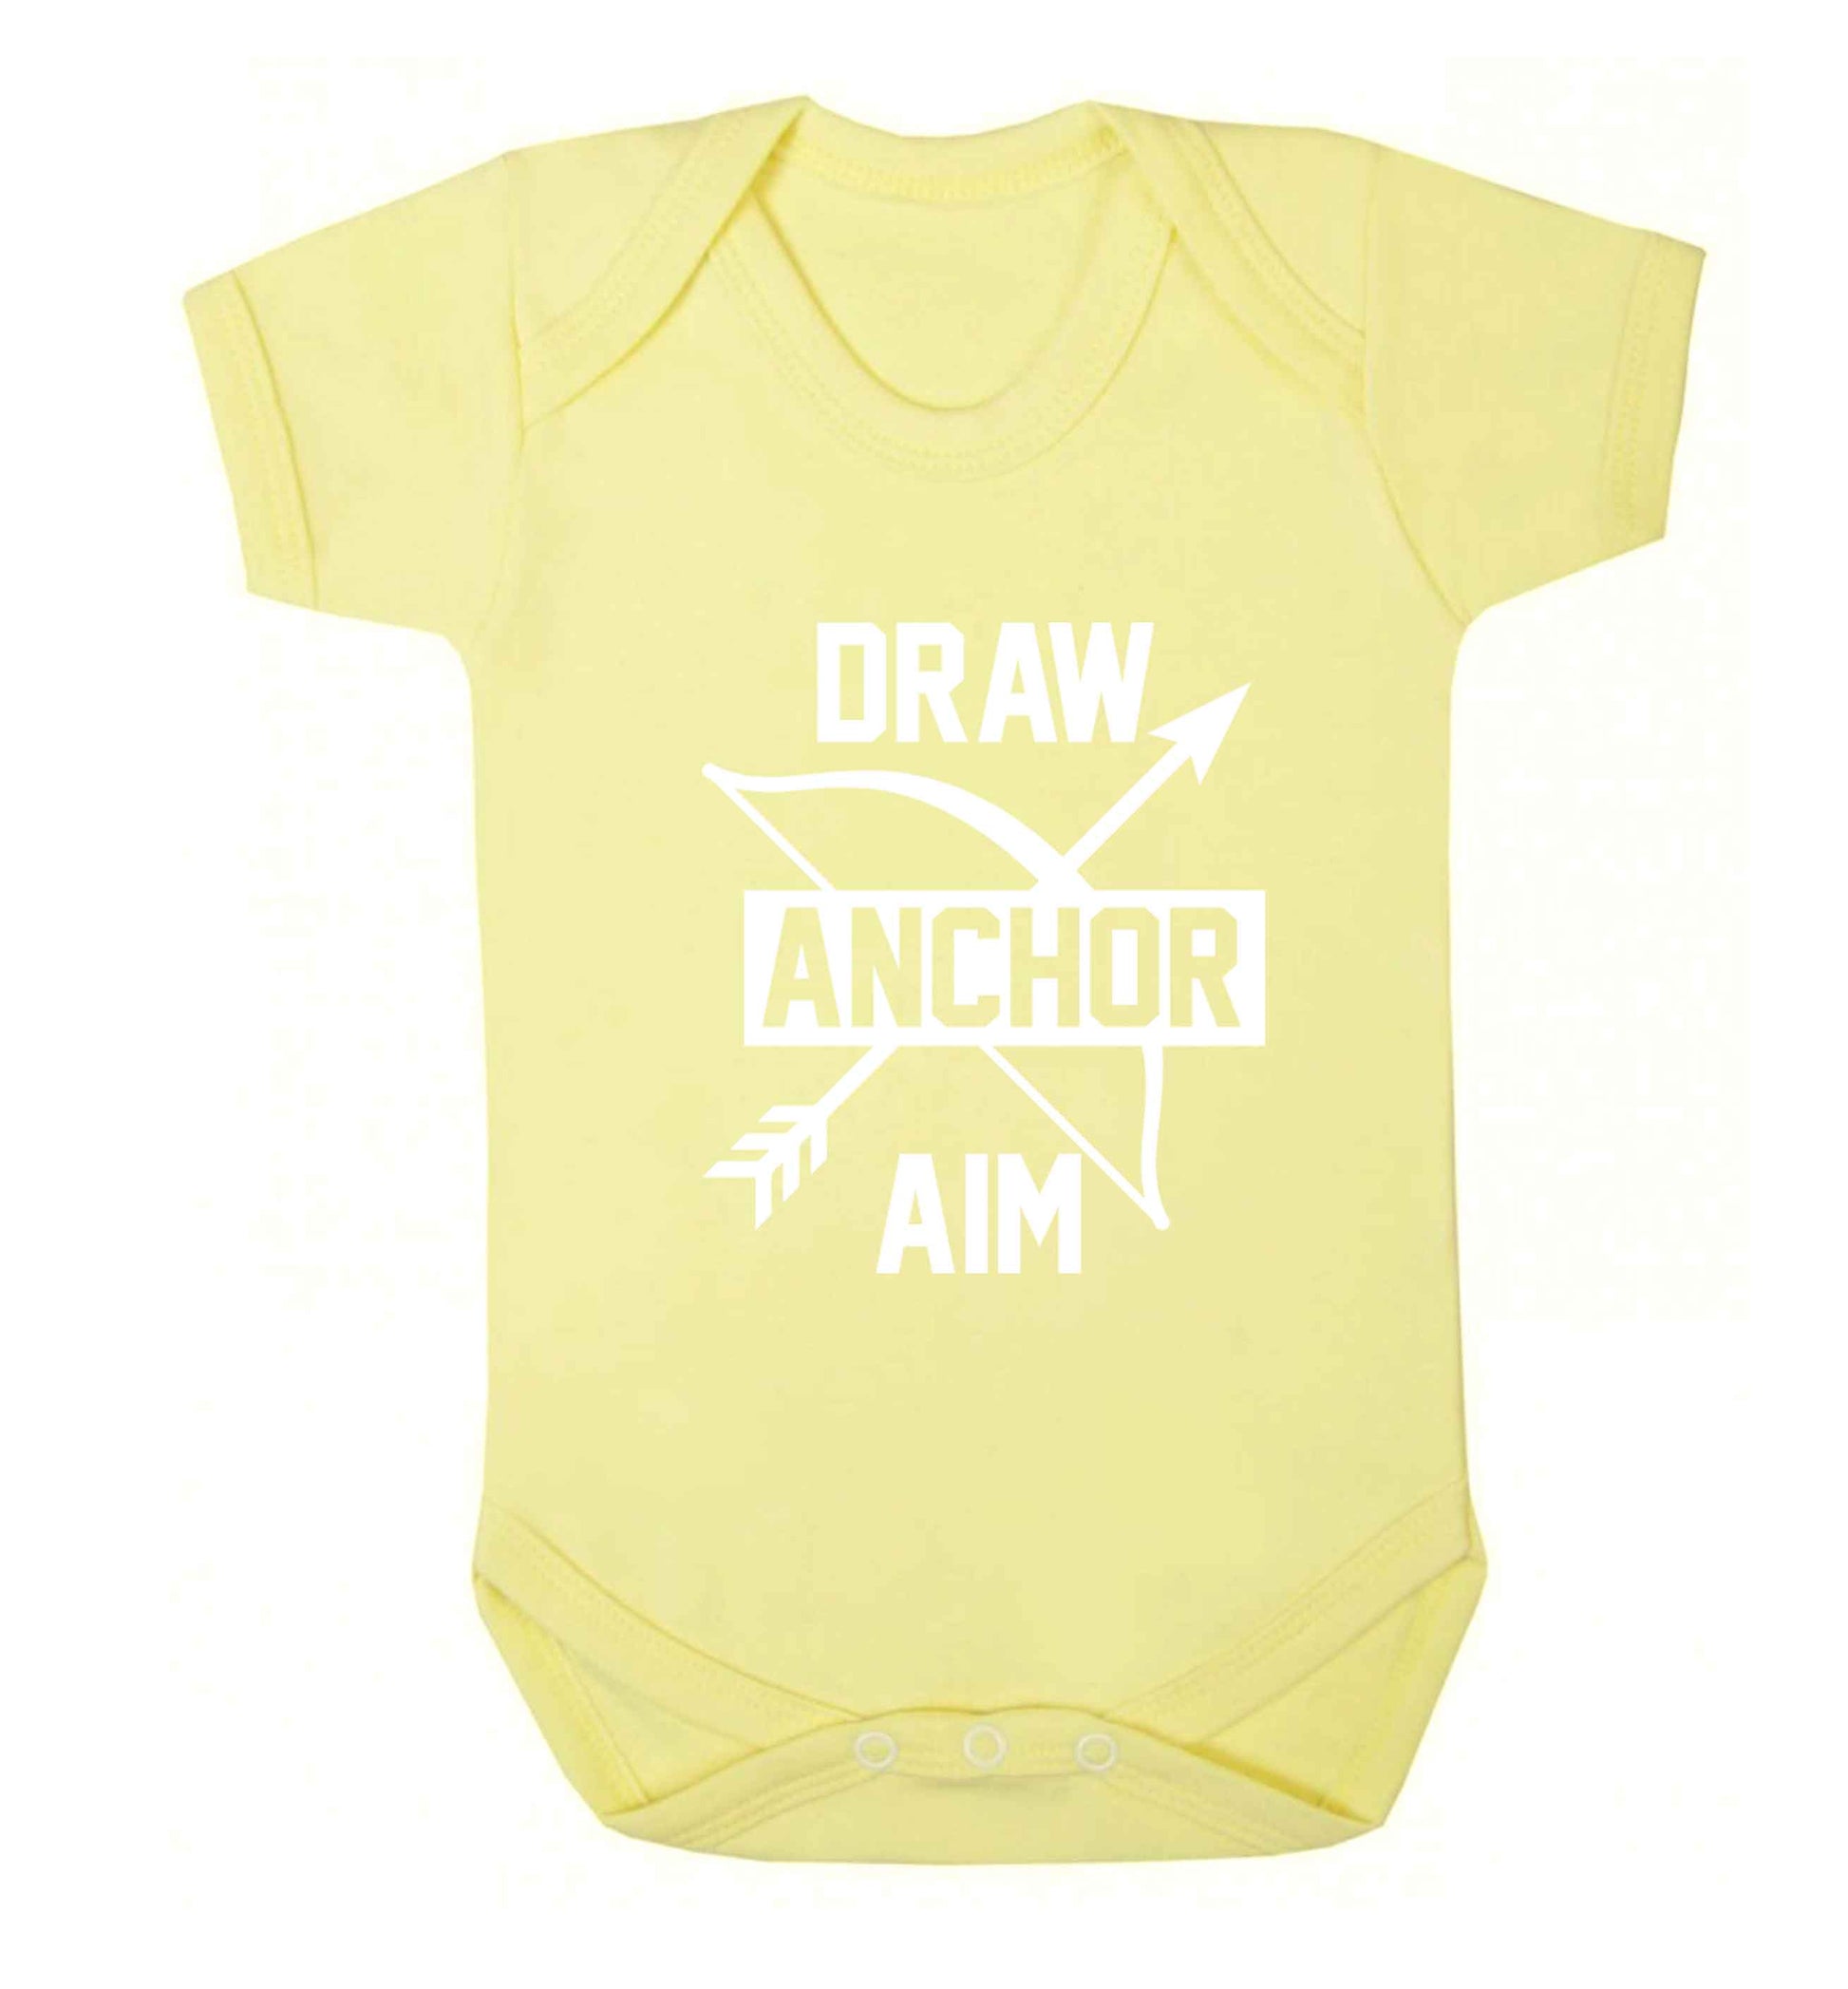 Draw anchor aim Baby Vest pale yellow 18-24 months